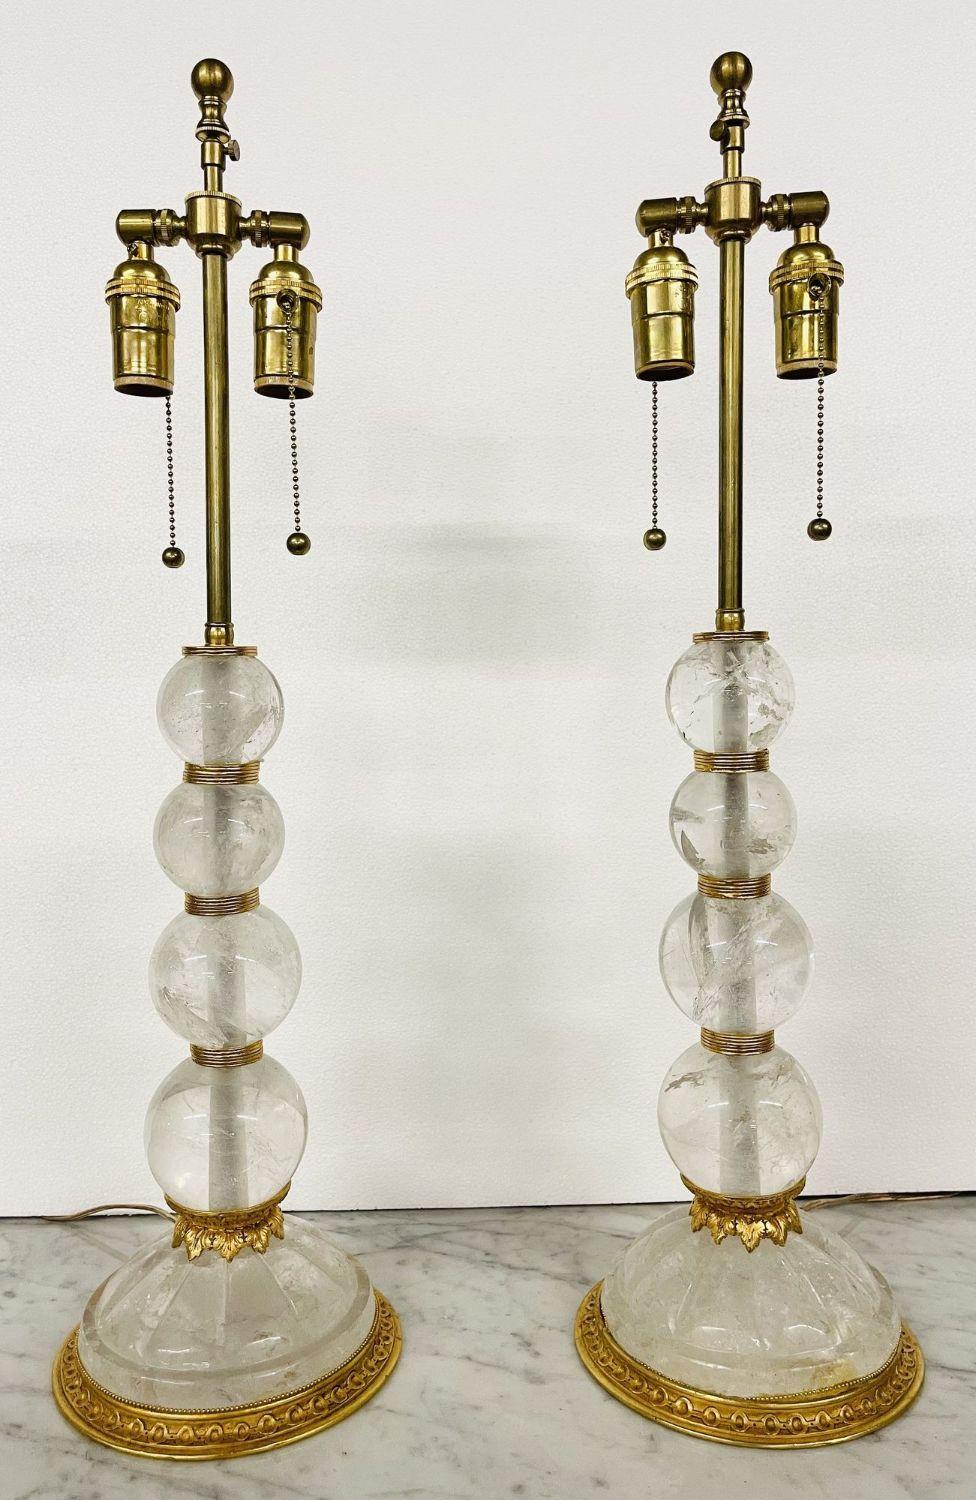 Pair of Baques Rock Crystal Table Lamps, 19th/20th Century In Good Condition For Sale In Stamford, CT